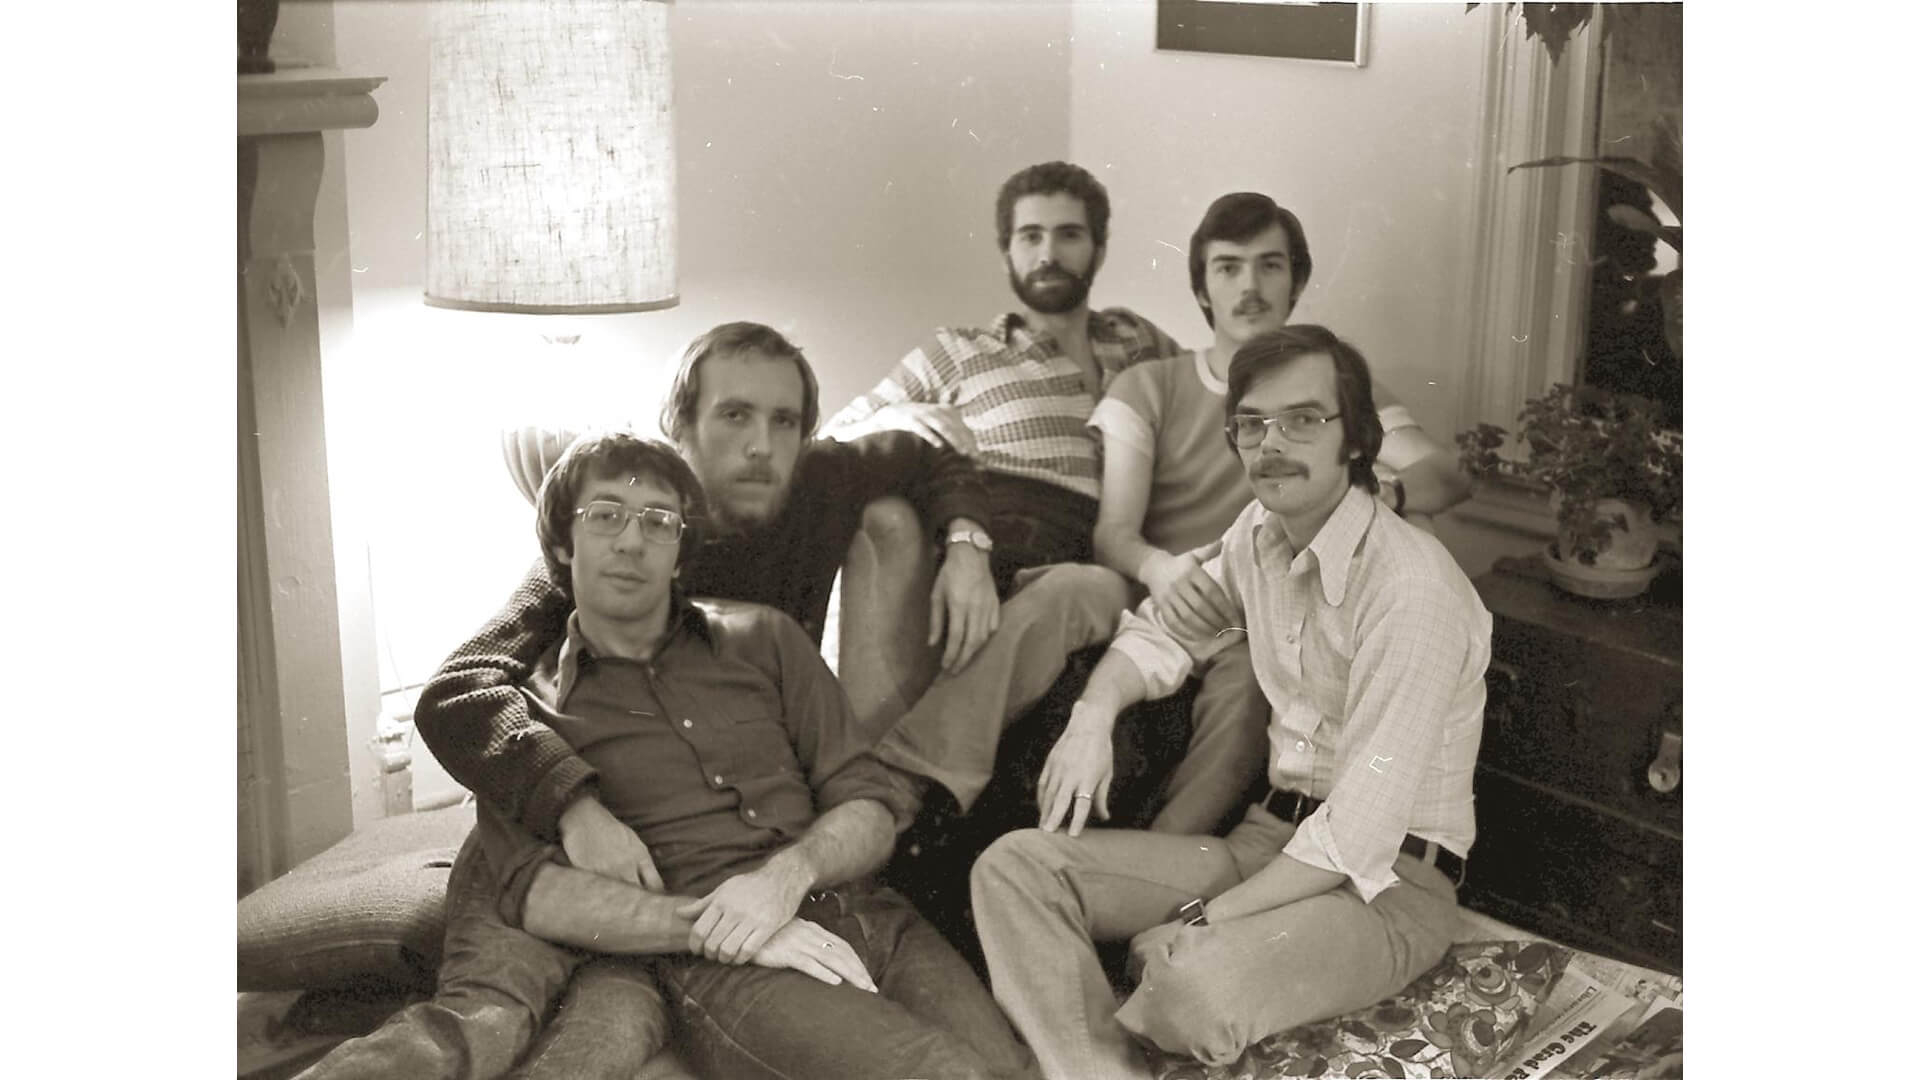 Gerald Hannon, Robert Trow, Ed Jackson, Herb Spiers and Merv Walker lived and worked together on The Body Politic (TBP), Canada’s gay liberation newspaper.